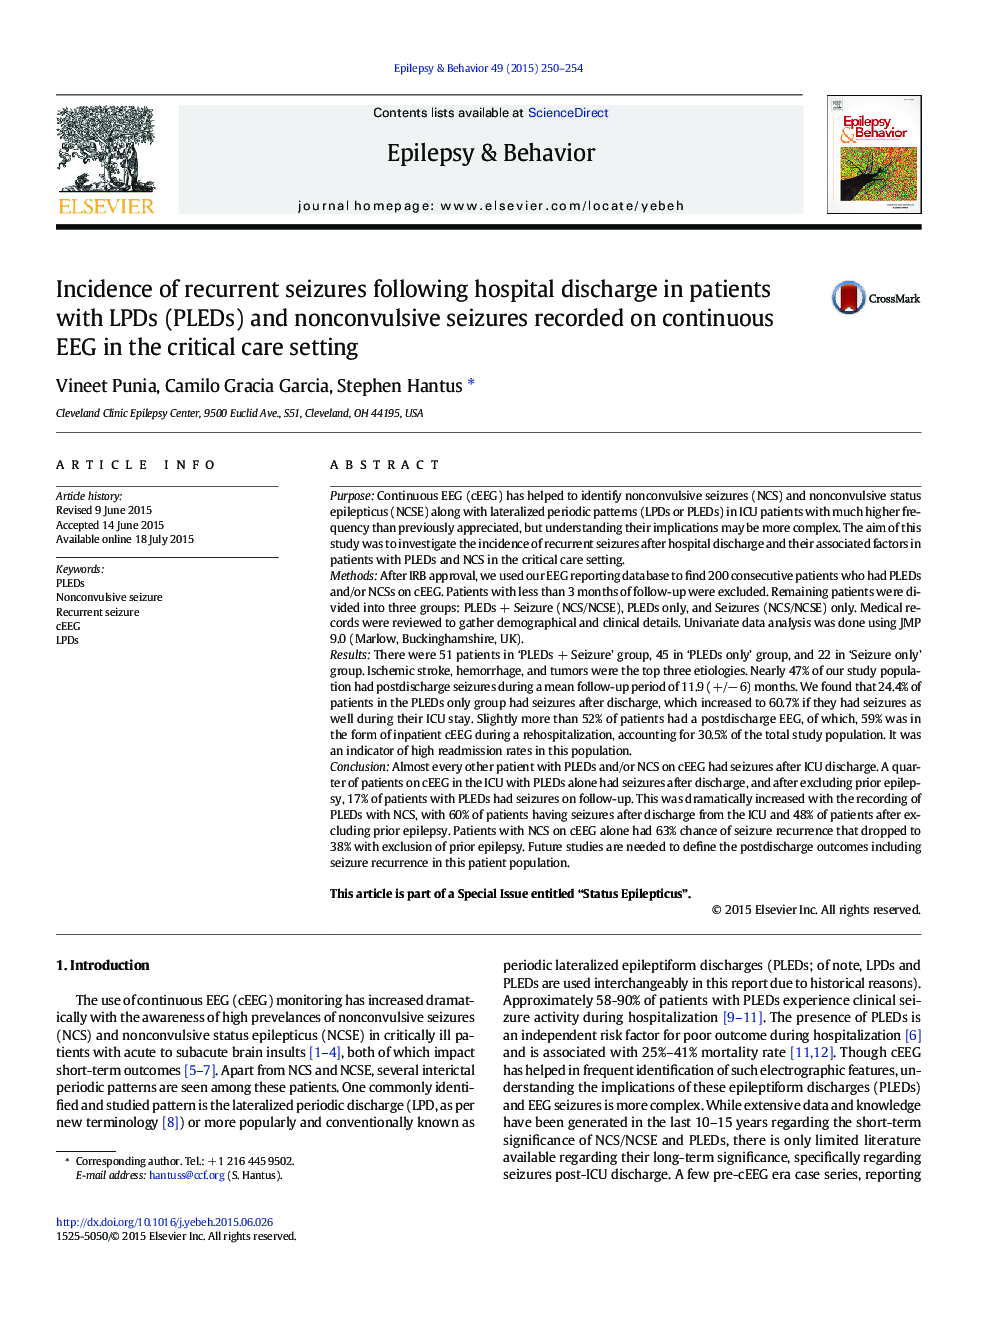 Incidence of recurrent seizures following hospital discharge in patients with LPDs (PLEDs) and nonconvulsive seizures recorded on continuous EEG in the critical care setting